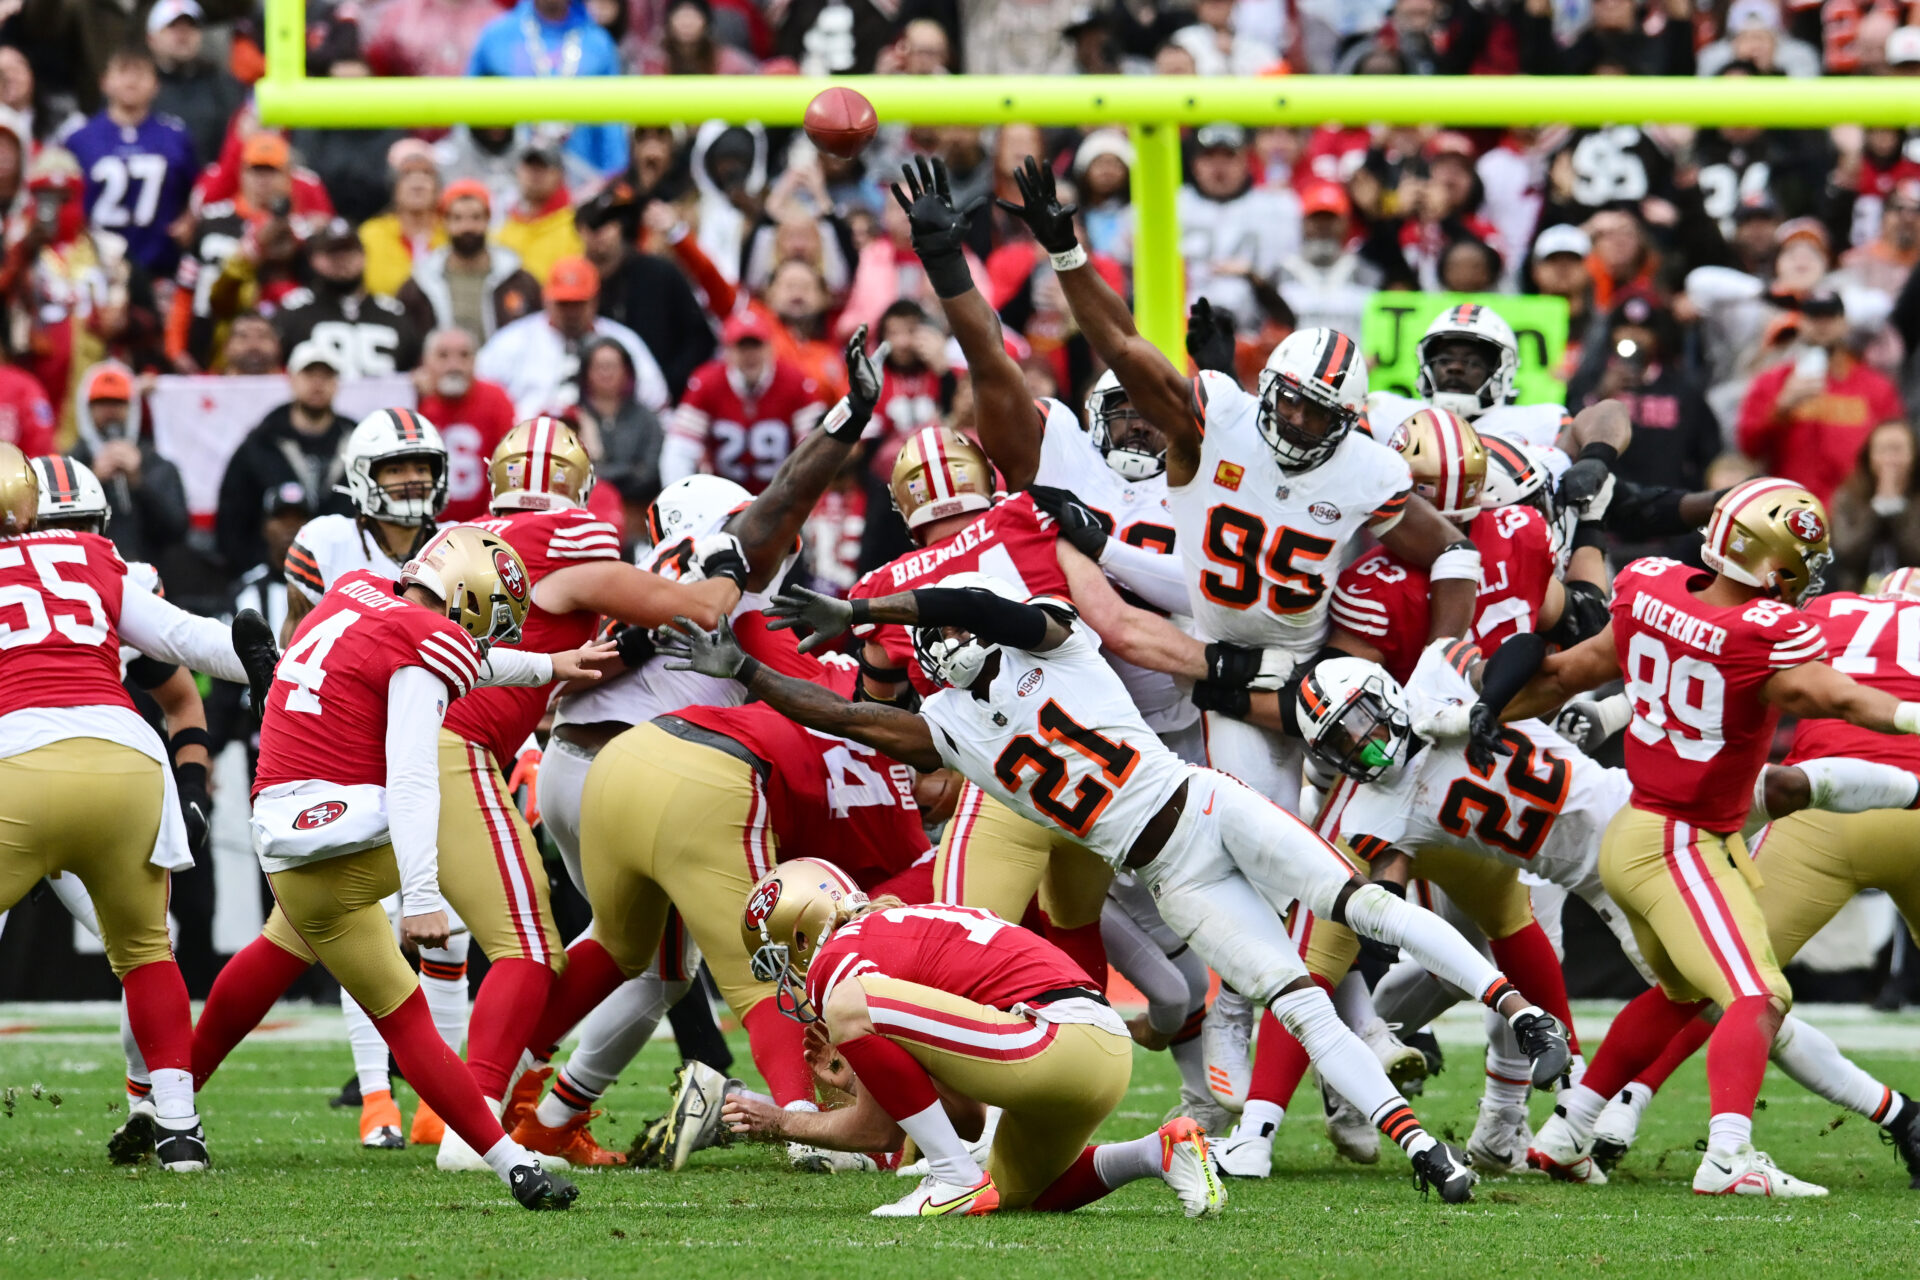 49ers kicker Jake Moody attempts a field goal against the Cleveland Browns